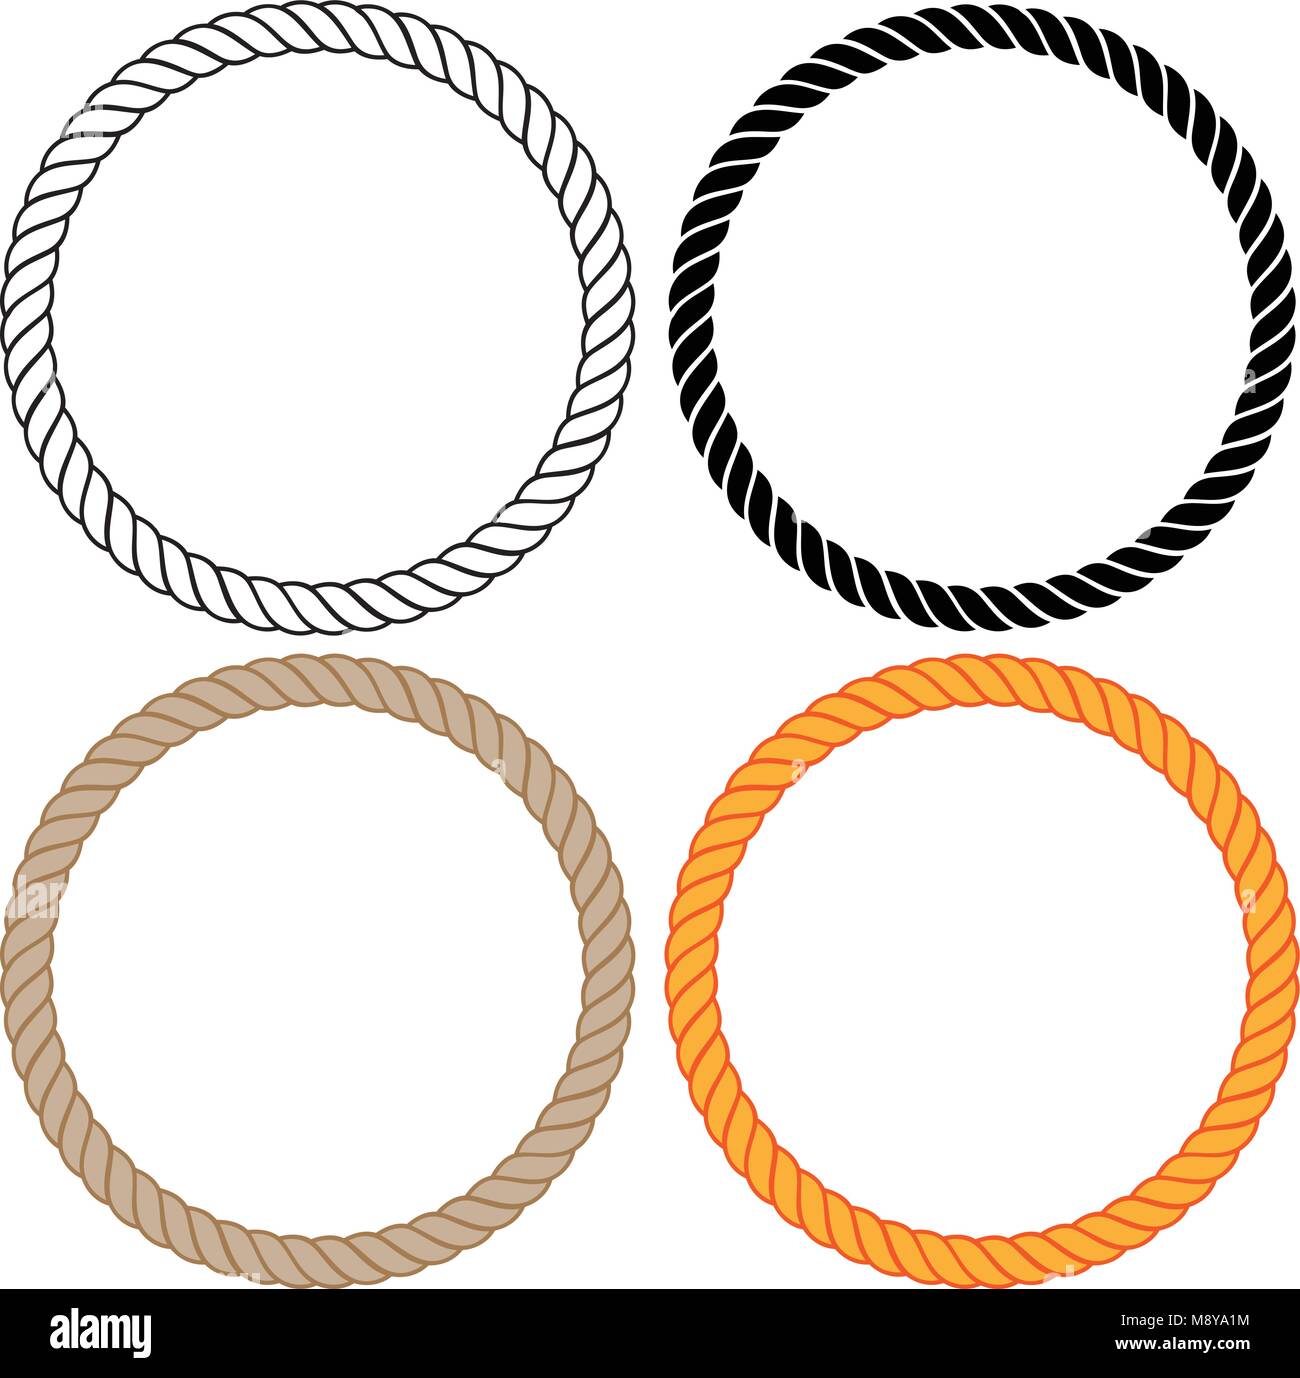 Braided twisted rope circles vector illustration Stock Vector